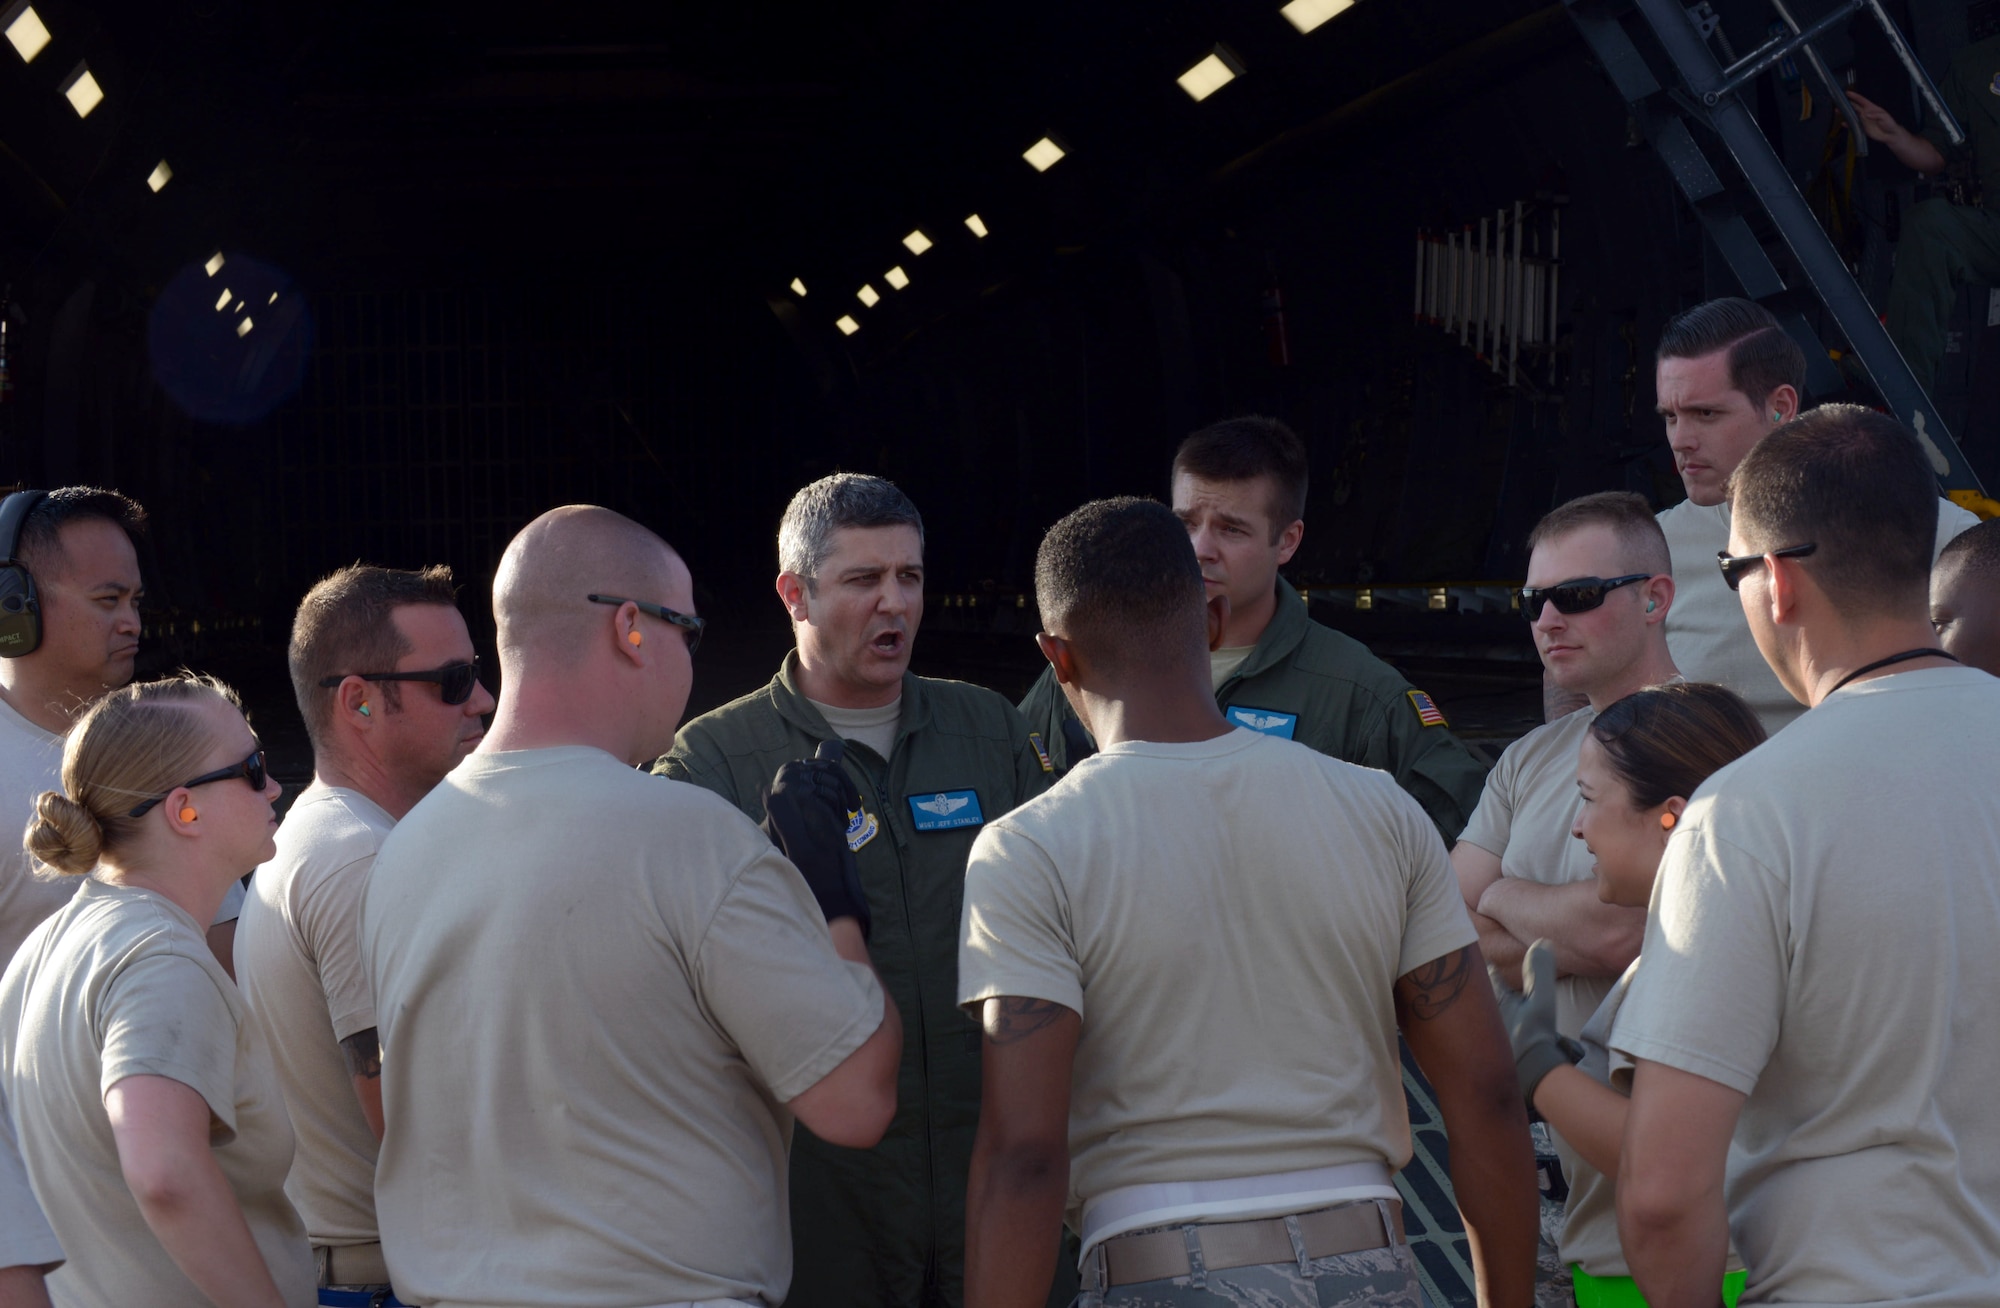 Master Sgt. Jeff Stanley, a load master with the 9th Airlift Squadron at Dover Air Force Base (AFB), Del., provides Airmen a mission safety brief at Ellsworth AFB, S.D., Aug. 2, 2016. Approximately 650 tons of equipment is being transported to Andersen AFB, Guam, in support of the continuous bomber presence mission. (U.S. Air Force photo by Airman Donald Knechtel)